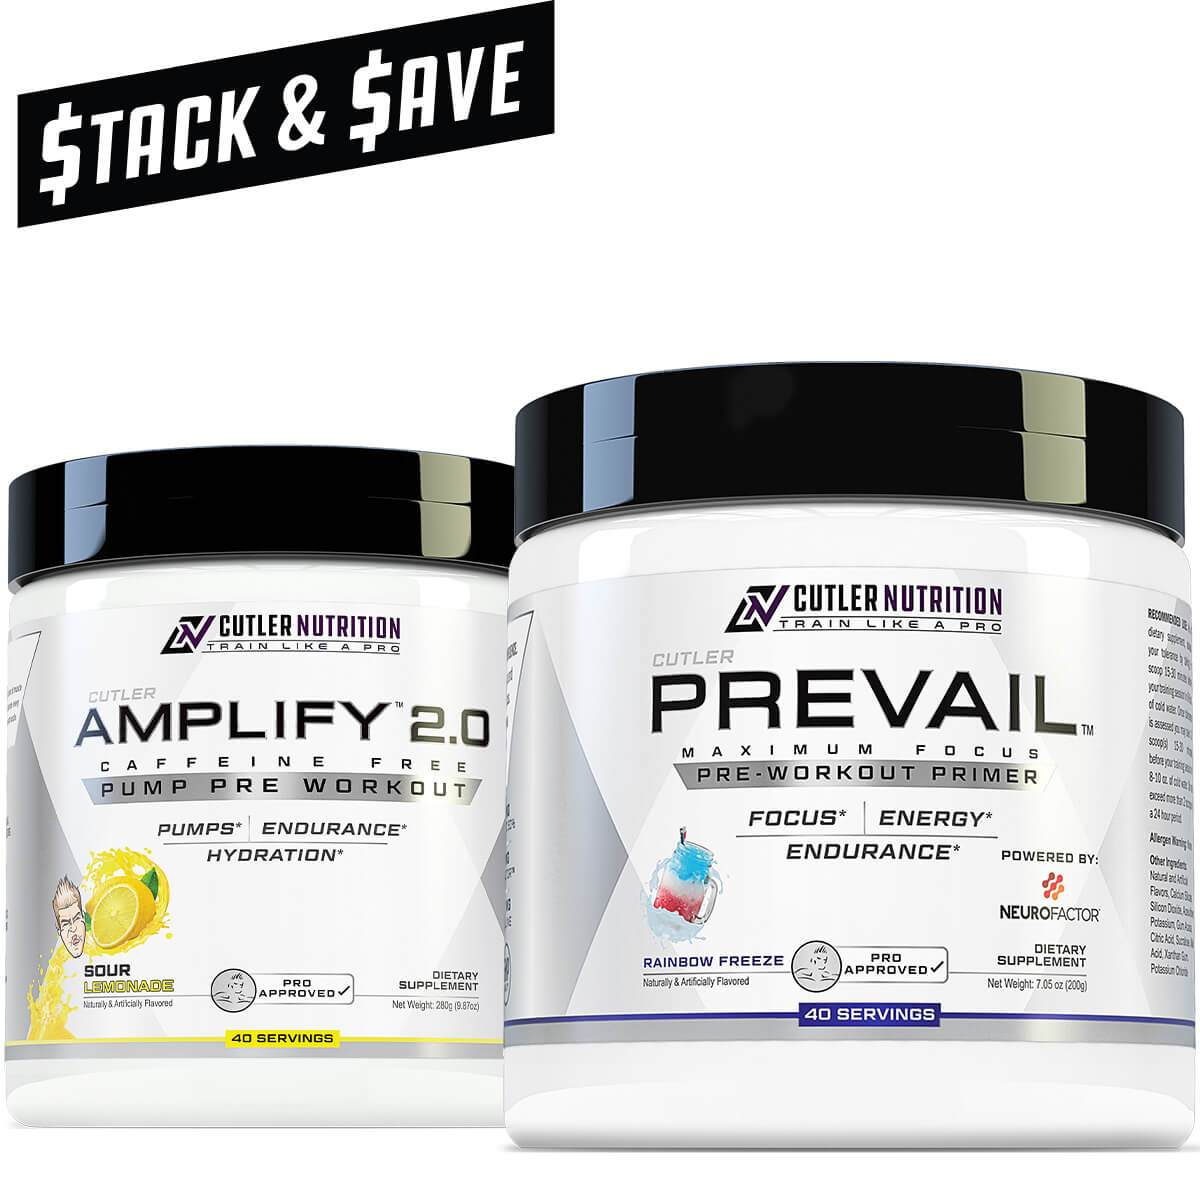 Amplify Pre-Workout Review - Is It Worth The Price?